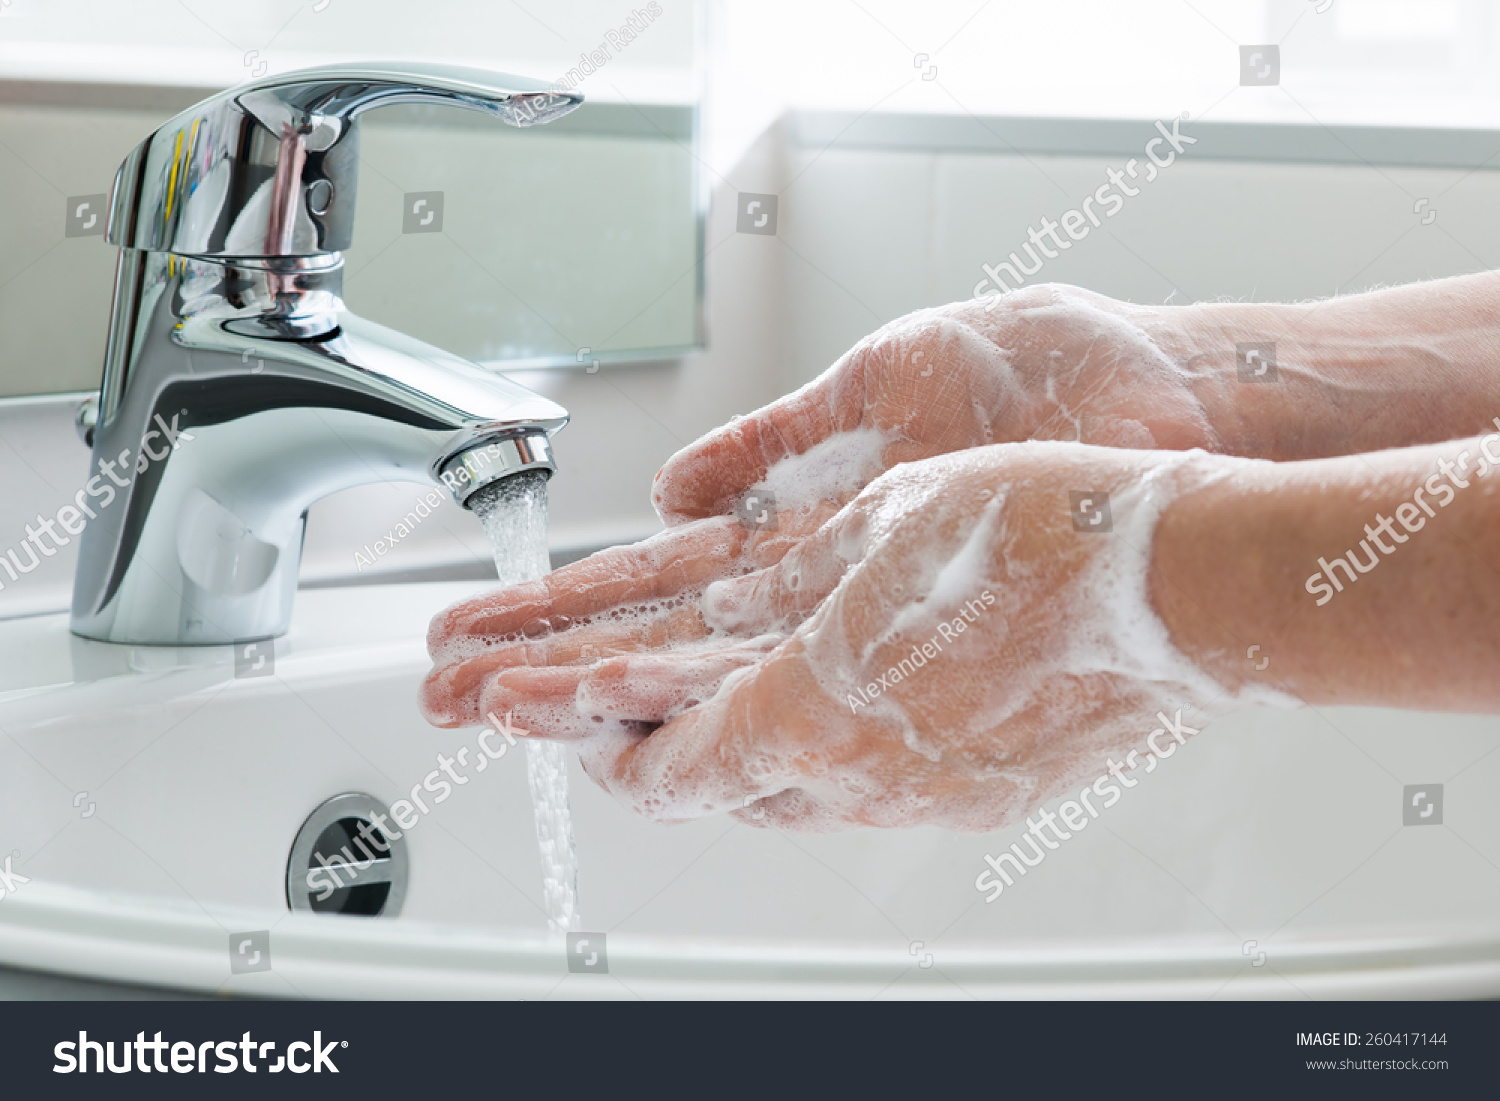 Hygiene concept. Washing hands with soap under the faucet with water #260417144